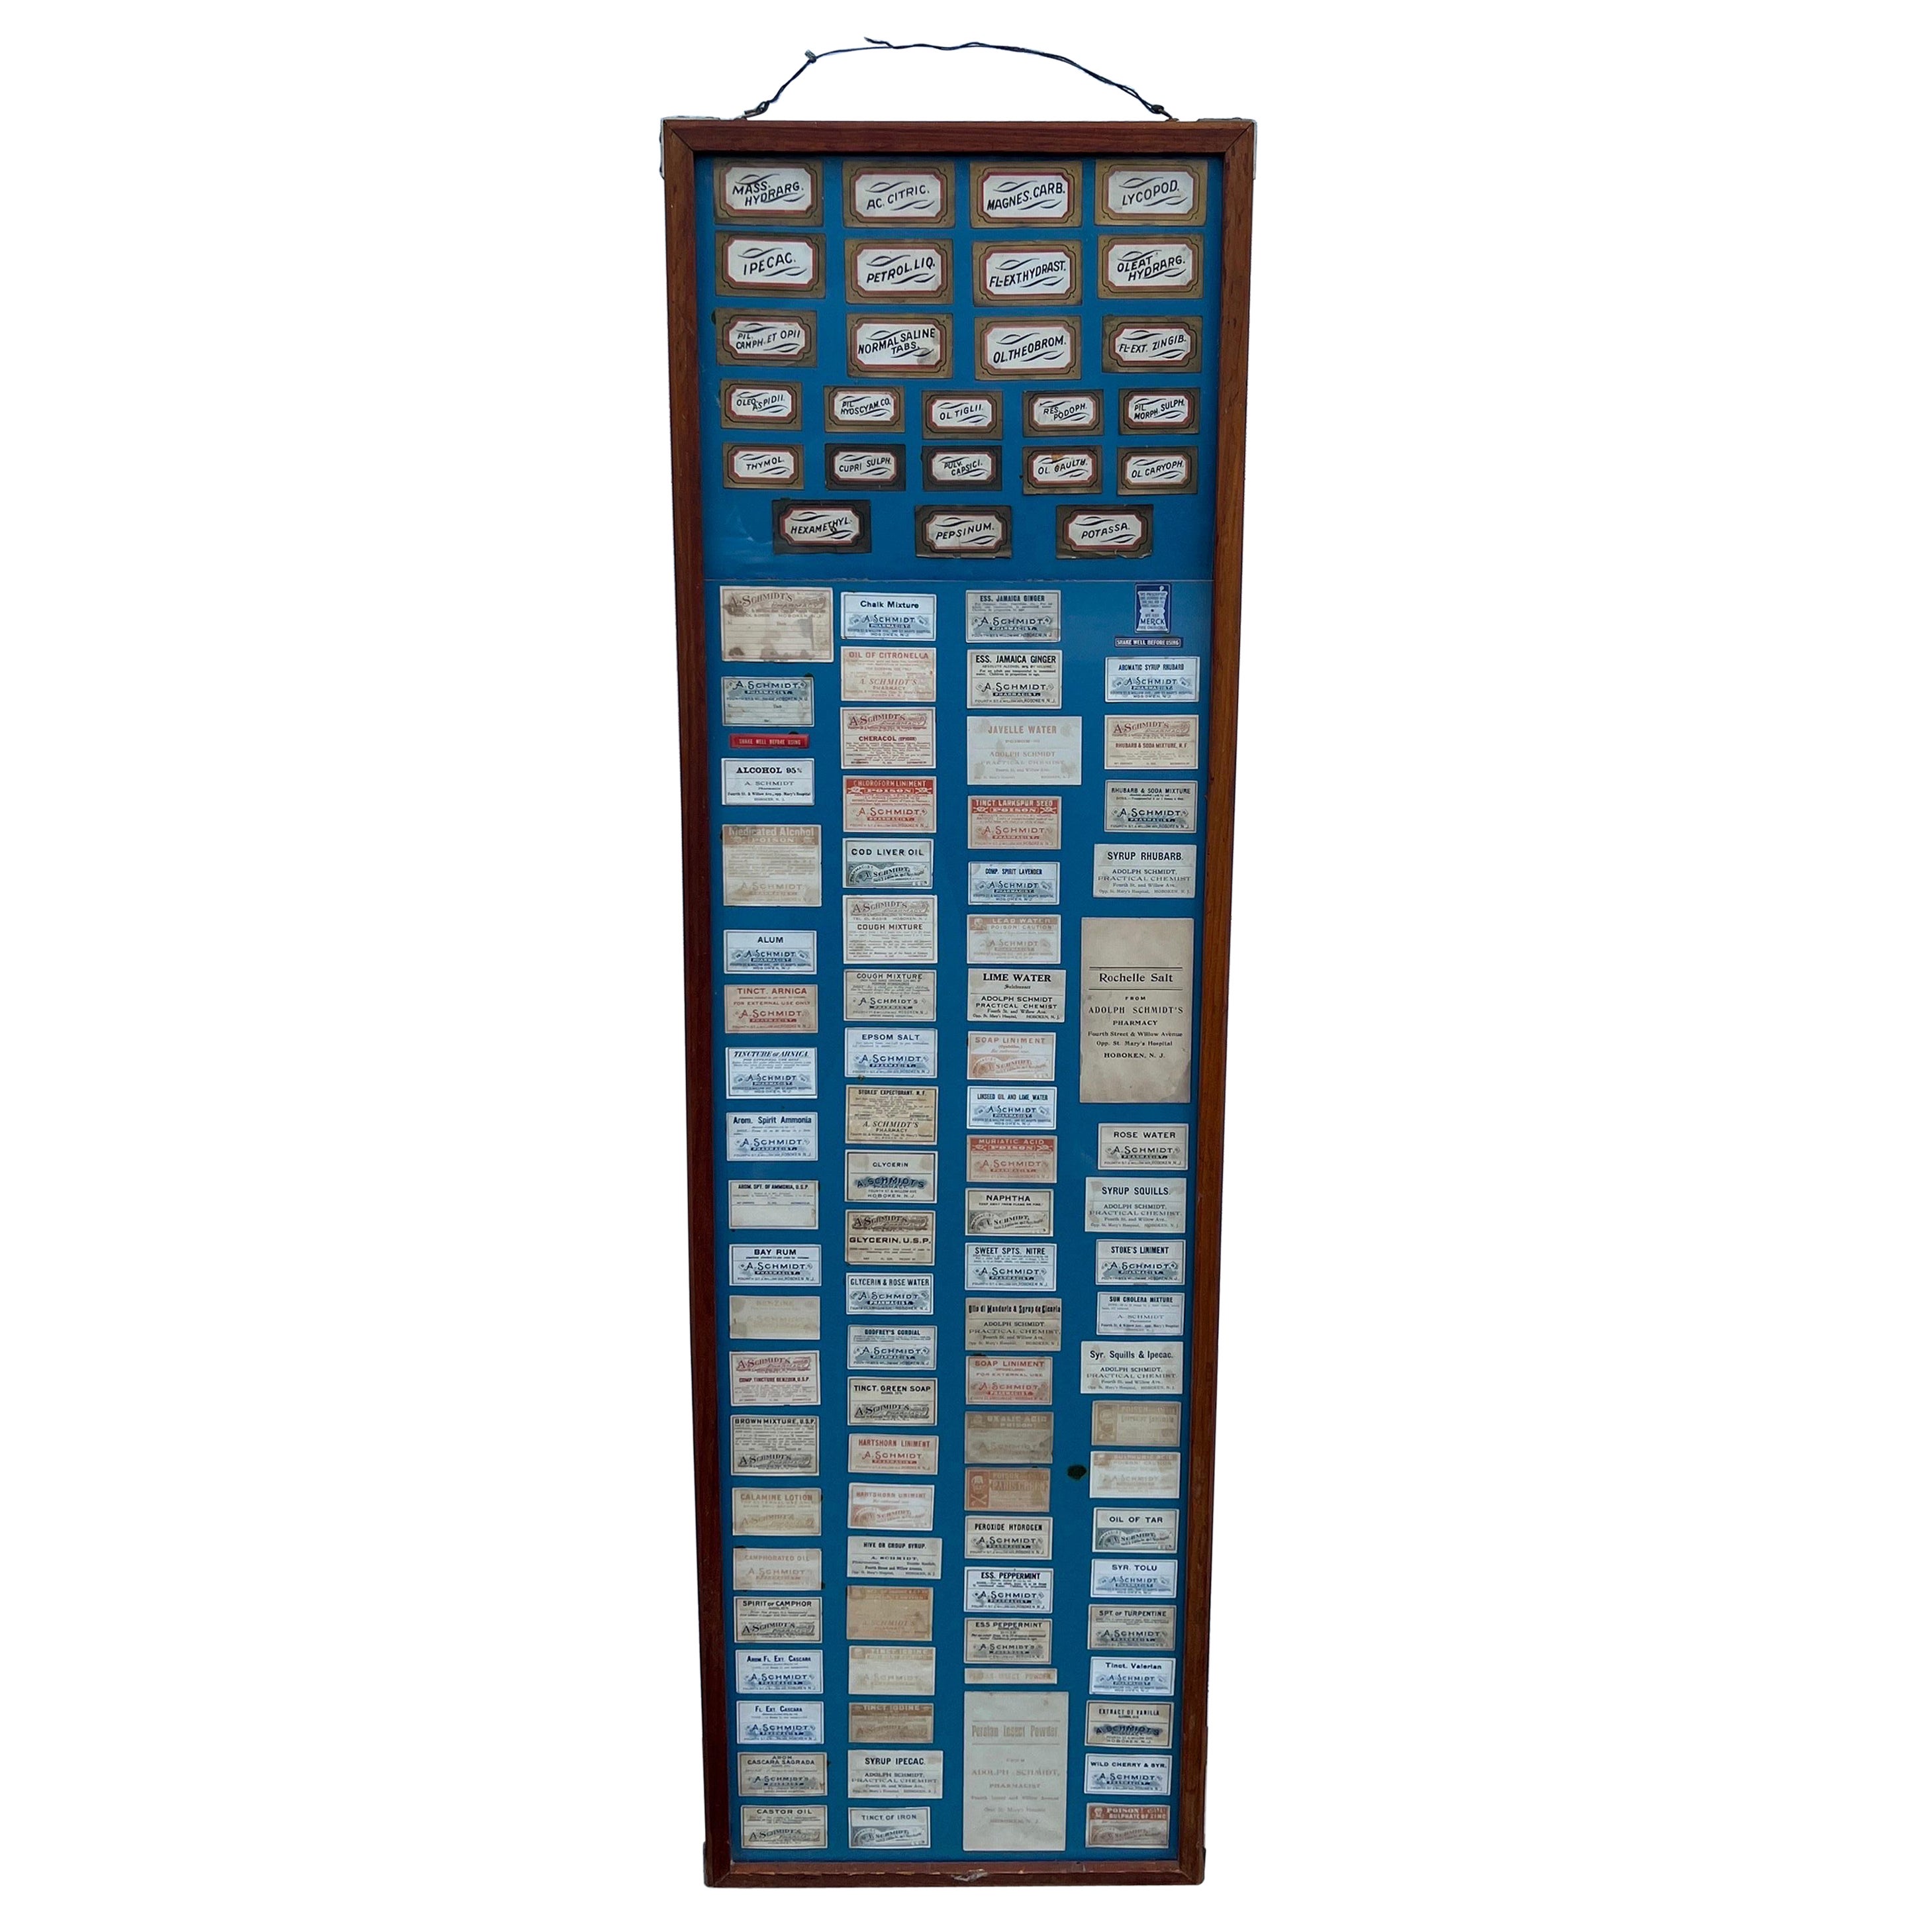 Rare Adolph Schmidt Pharmacy Label Display Including 110 Antique Labels